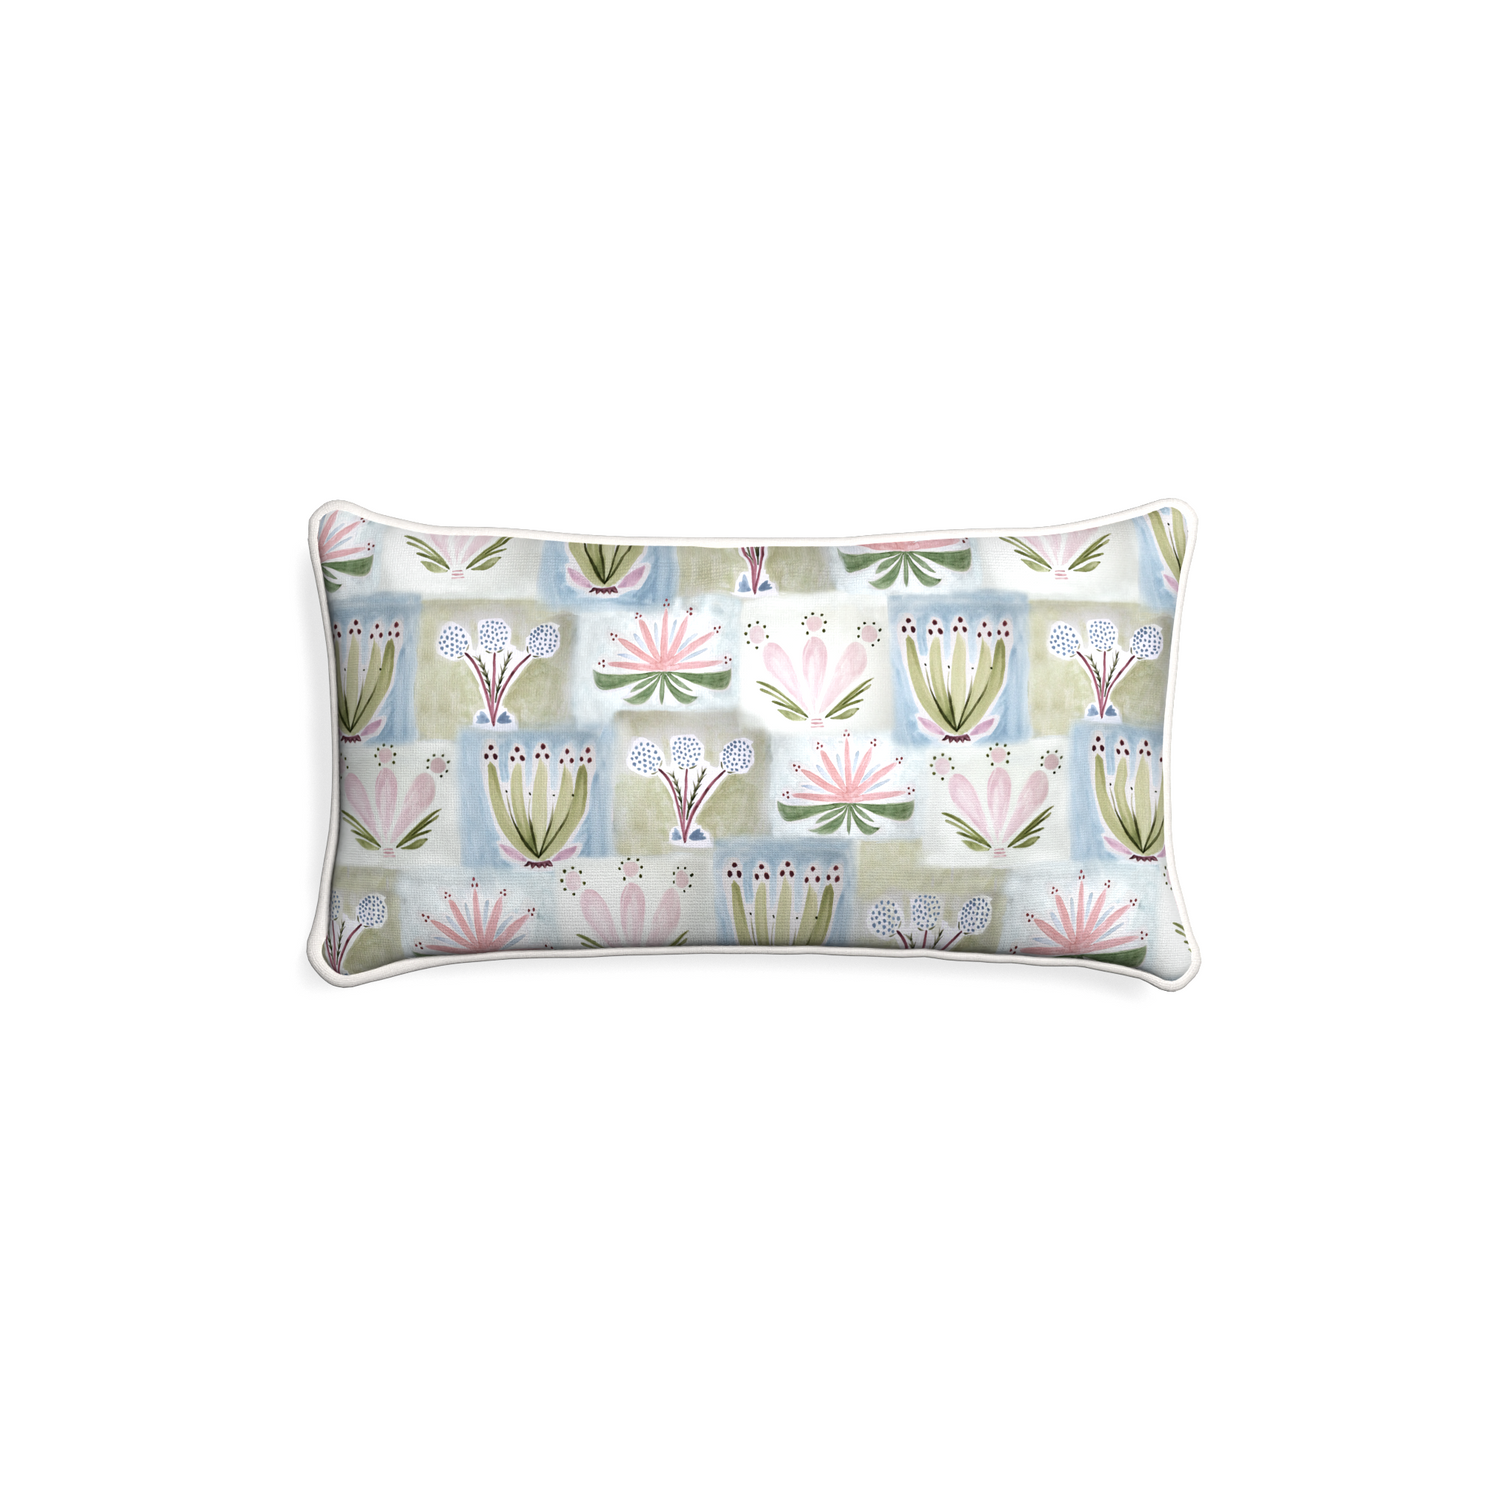 Petite-lumbar harper custom hand-painted floralpillow with snow piping on white background